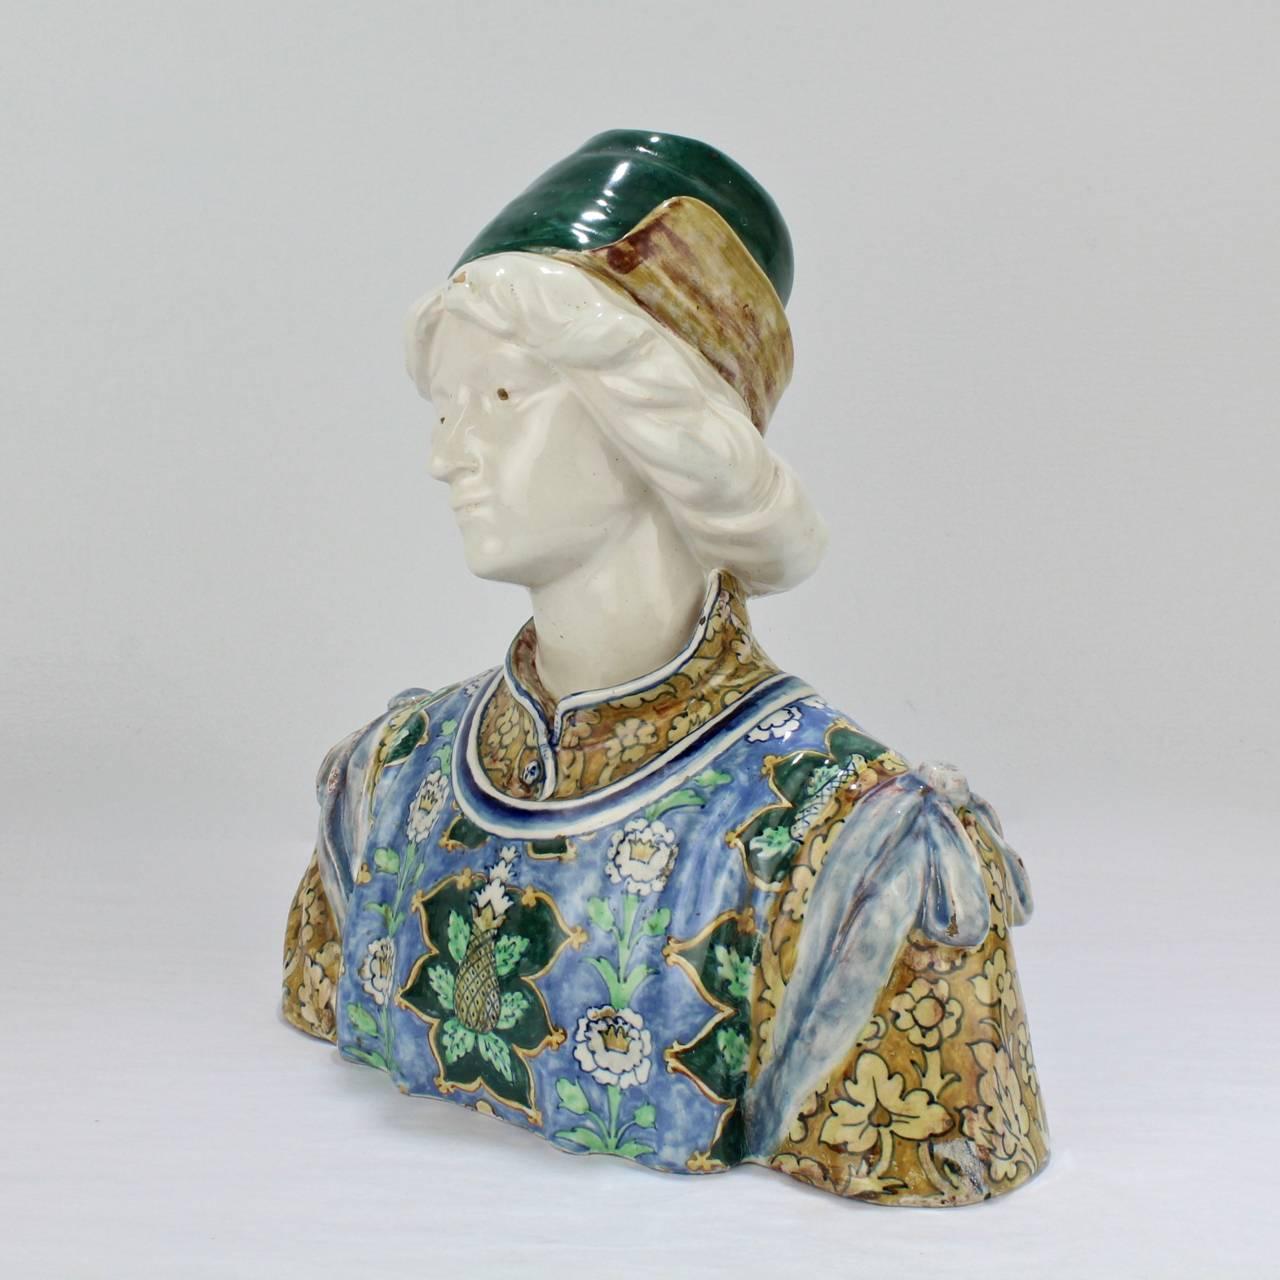 A very fine, antique Italian Maiolica bust of a Renaissance youth.

Made in the Angelo Minghetti factory in Bologna, Italy in the late 19th or early 20th century.

Angelo Minghetti started producing ceramics at Imola in 1848. He started his